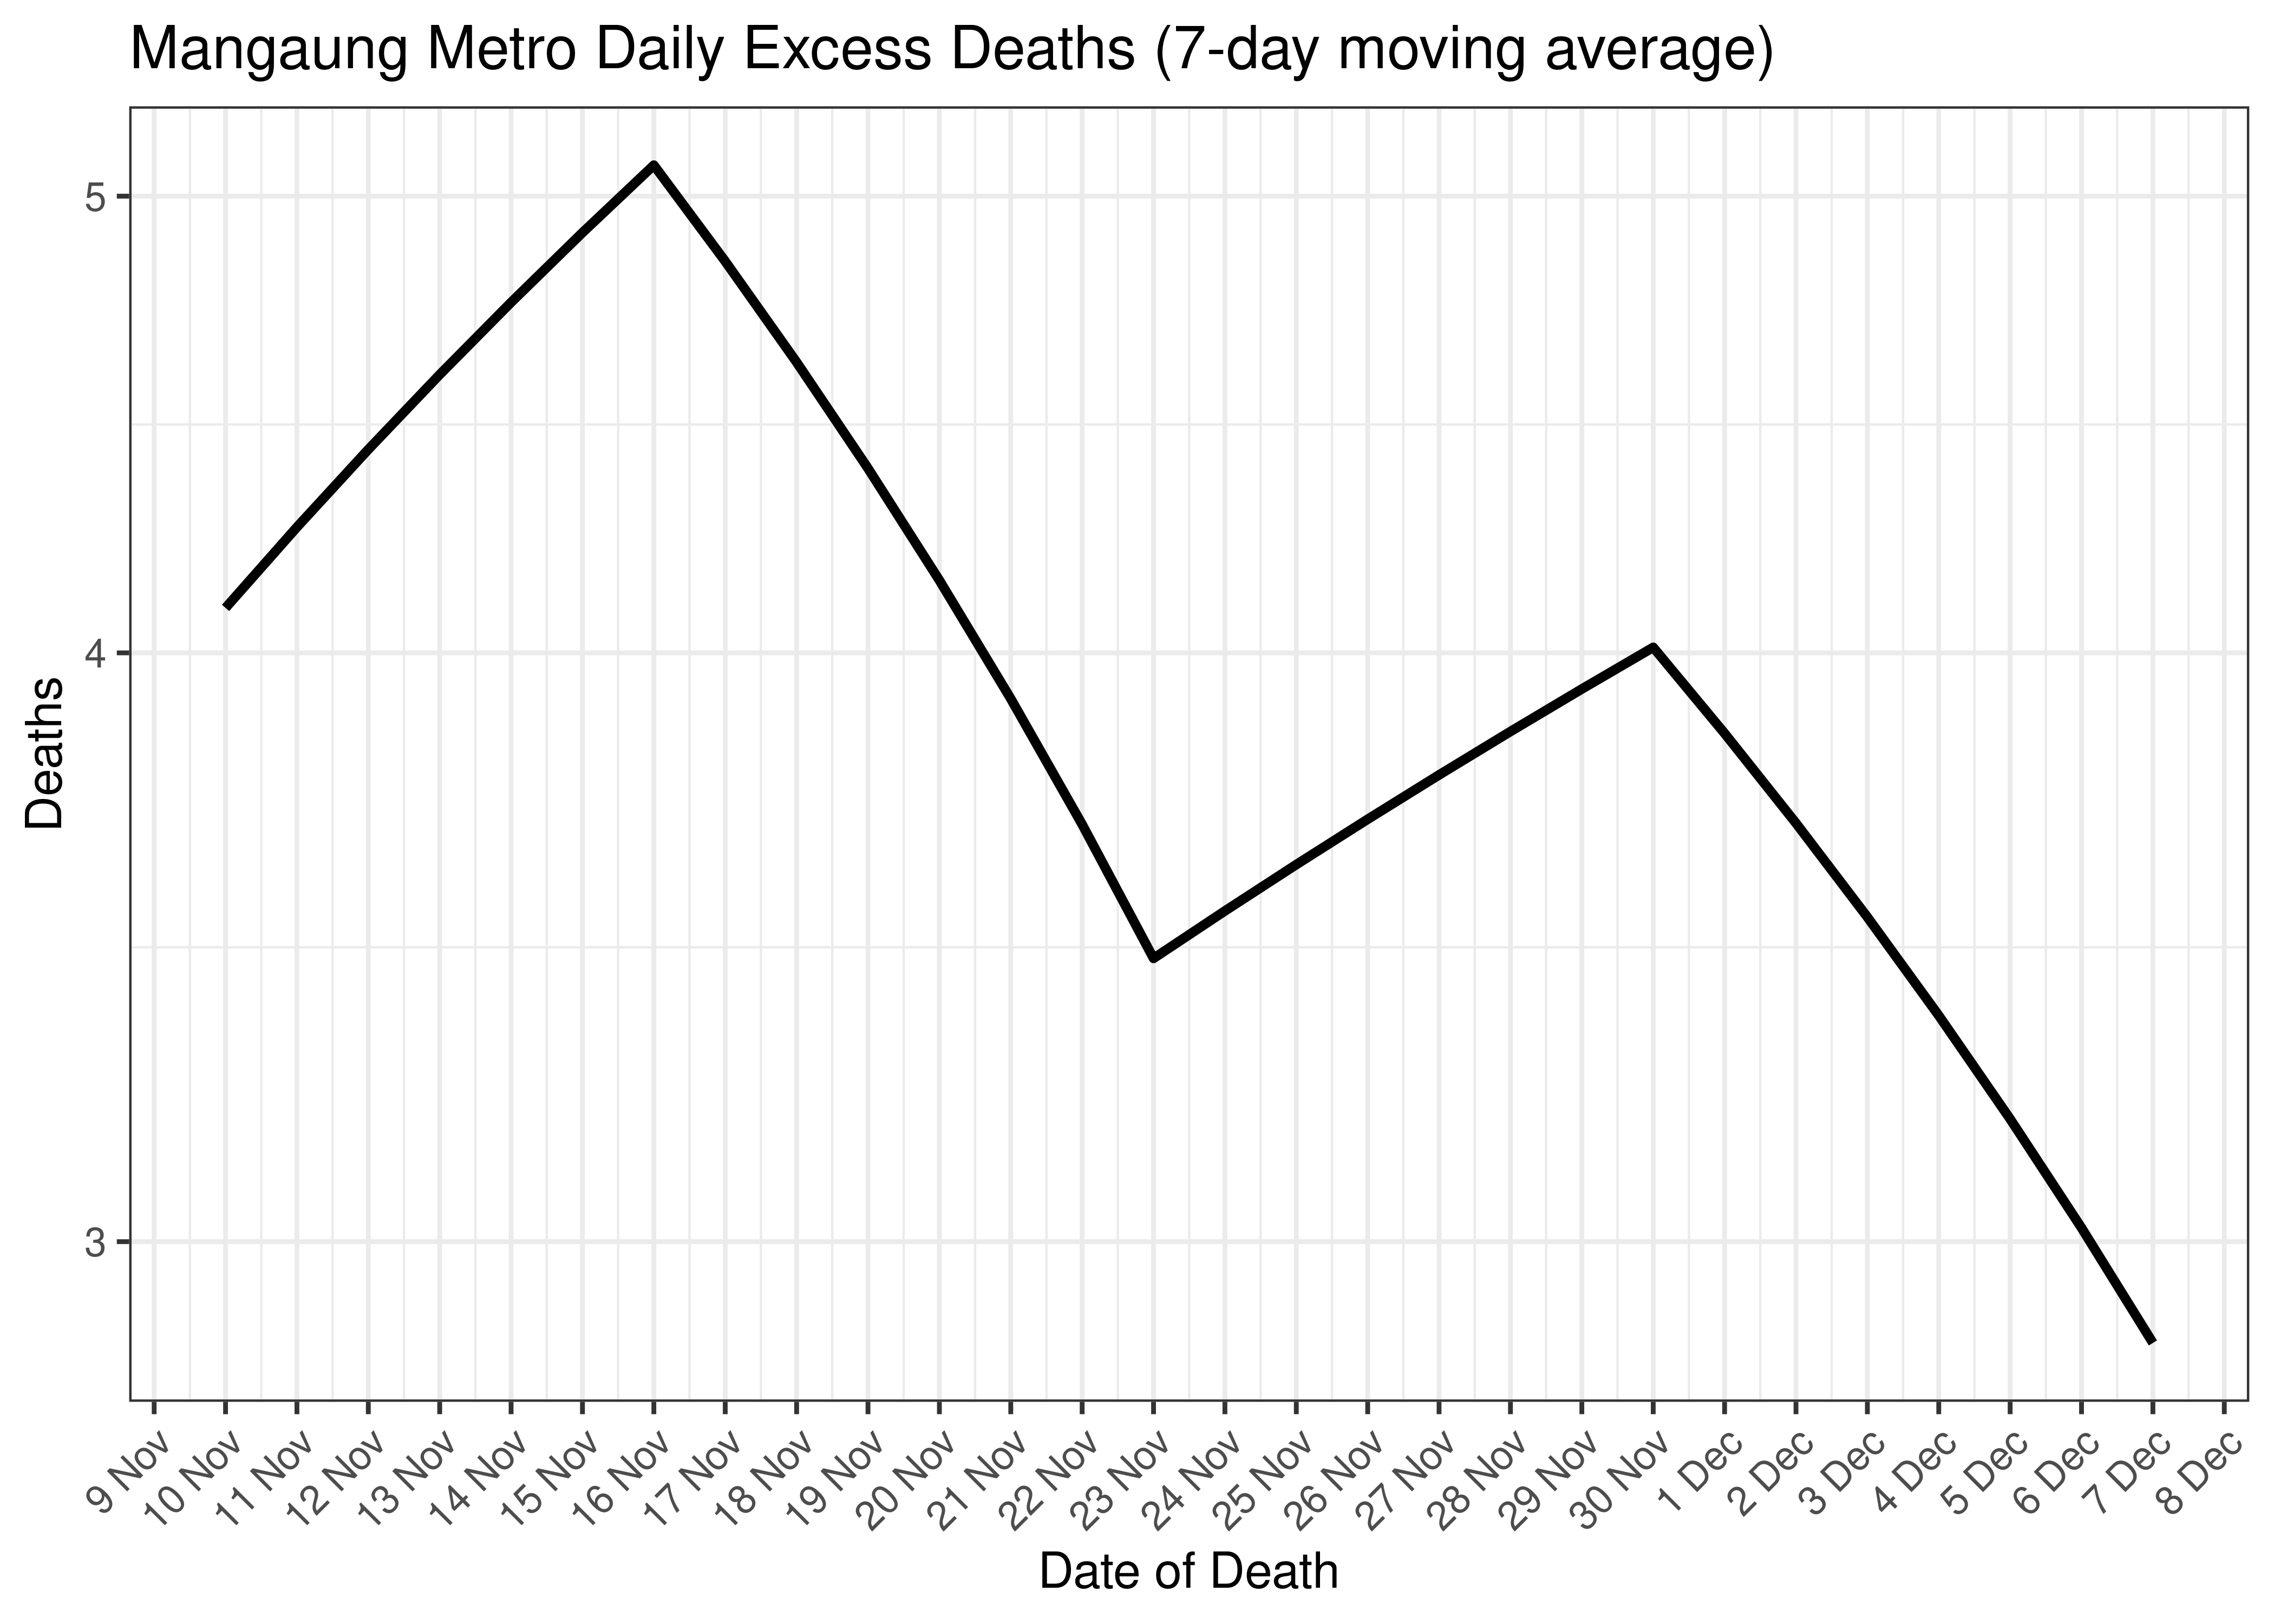 Mangaung Metro Excess Deaths for Last 30-days (7-day moving average)